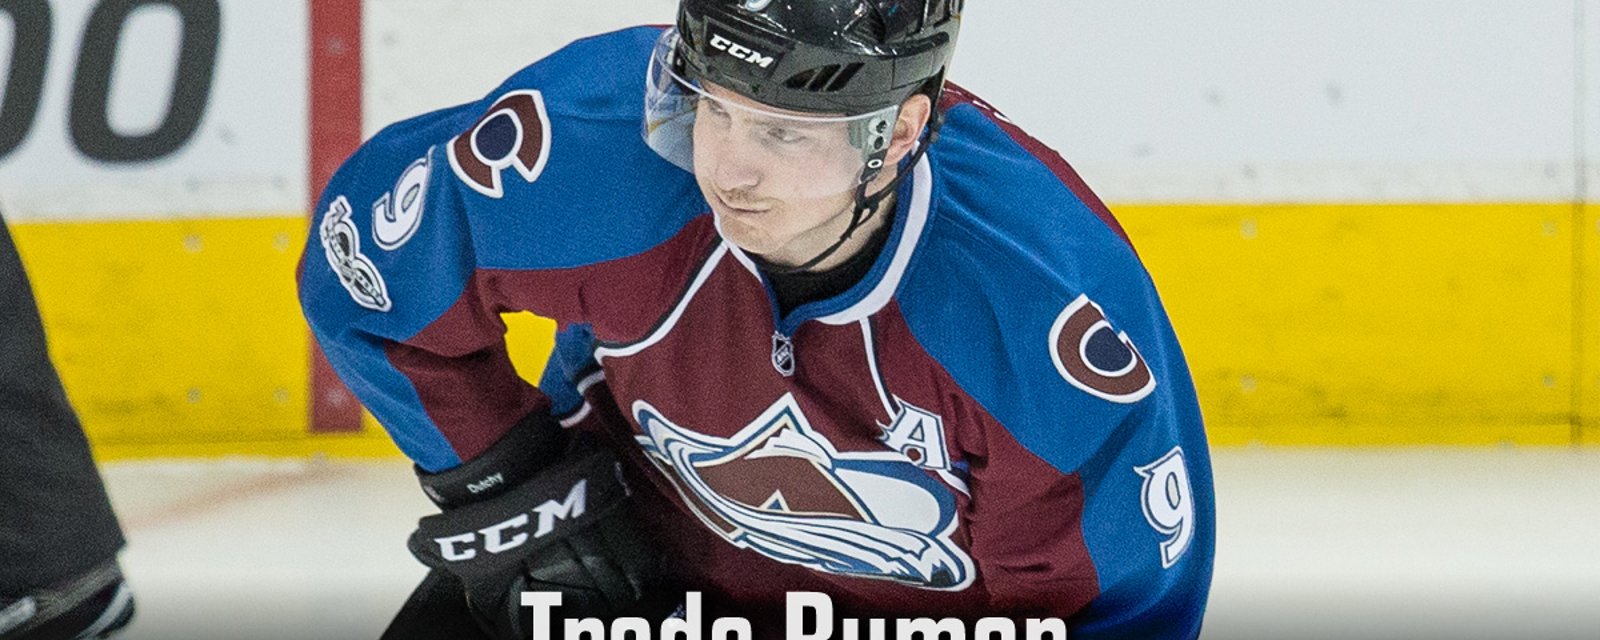 Trade Rumors : Duchene pours fuel on the fire!